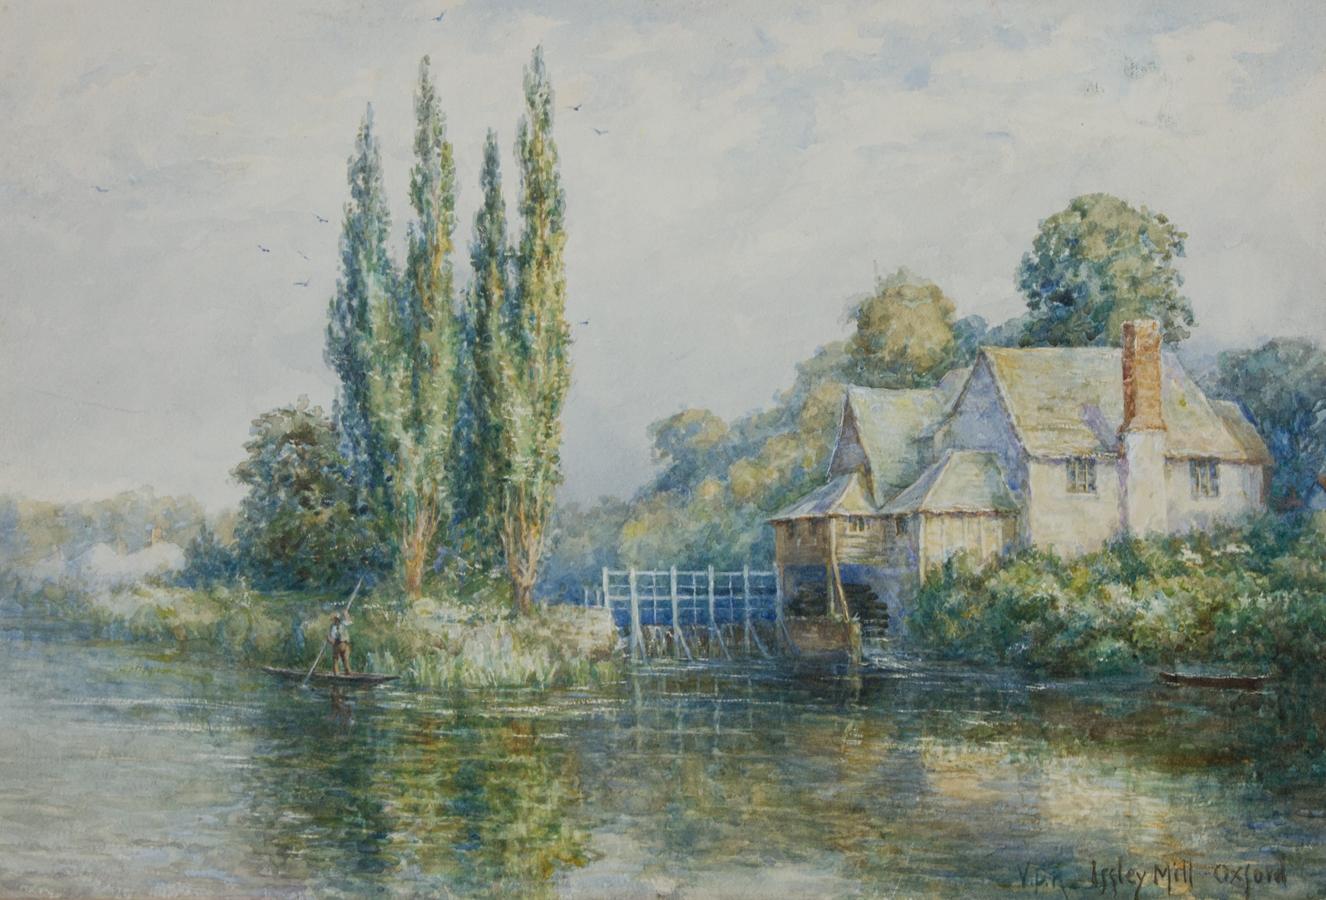 V.P.A - Early 20th Century Watercolour, Iffley Mill, Oxford - Art by Unknown